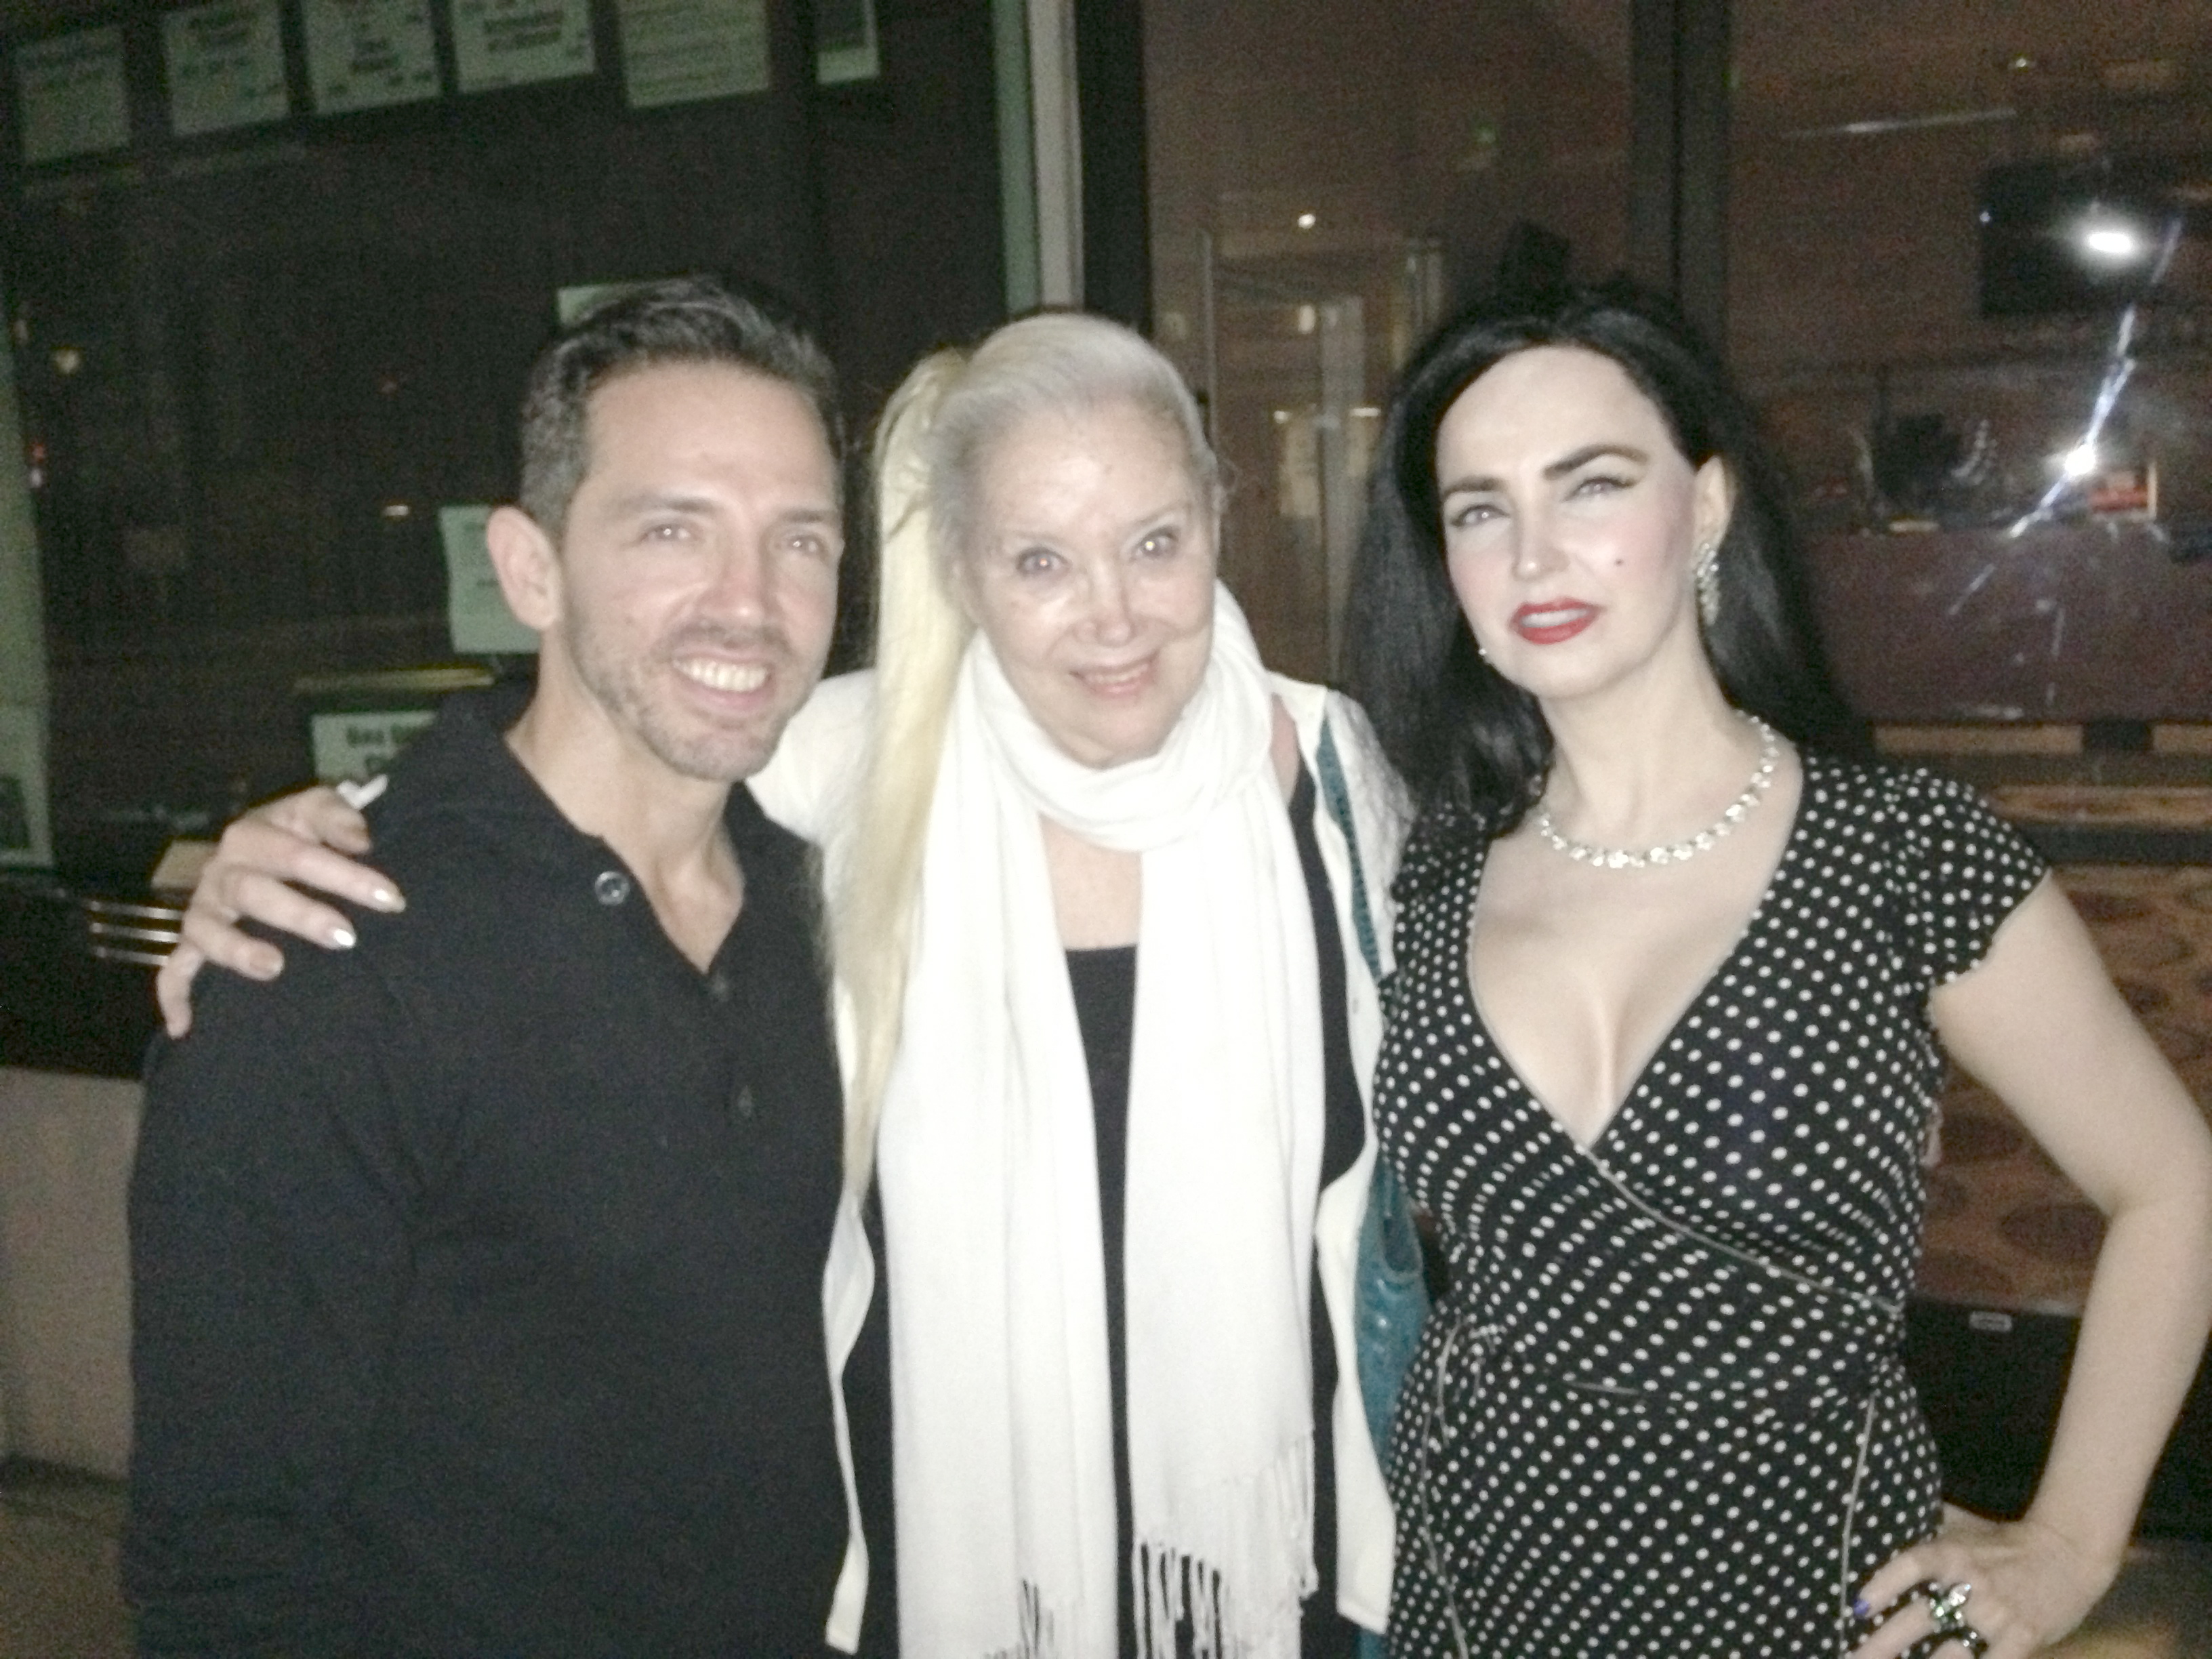 Actress Alexis Kiley with actress Sally Kirkland and actor Mel England at the premiere screening of Sally Kirkland's film -Archeology of a Woman. Laemmle Music Hall, Beverly Hills, Ca. Beverly Hills, California